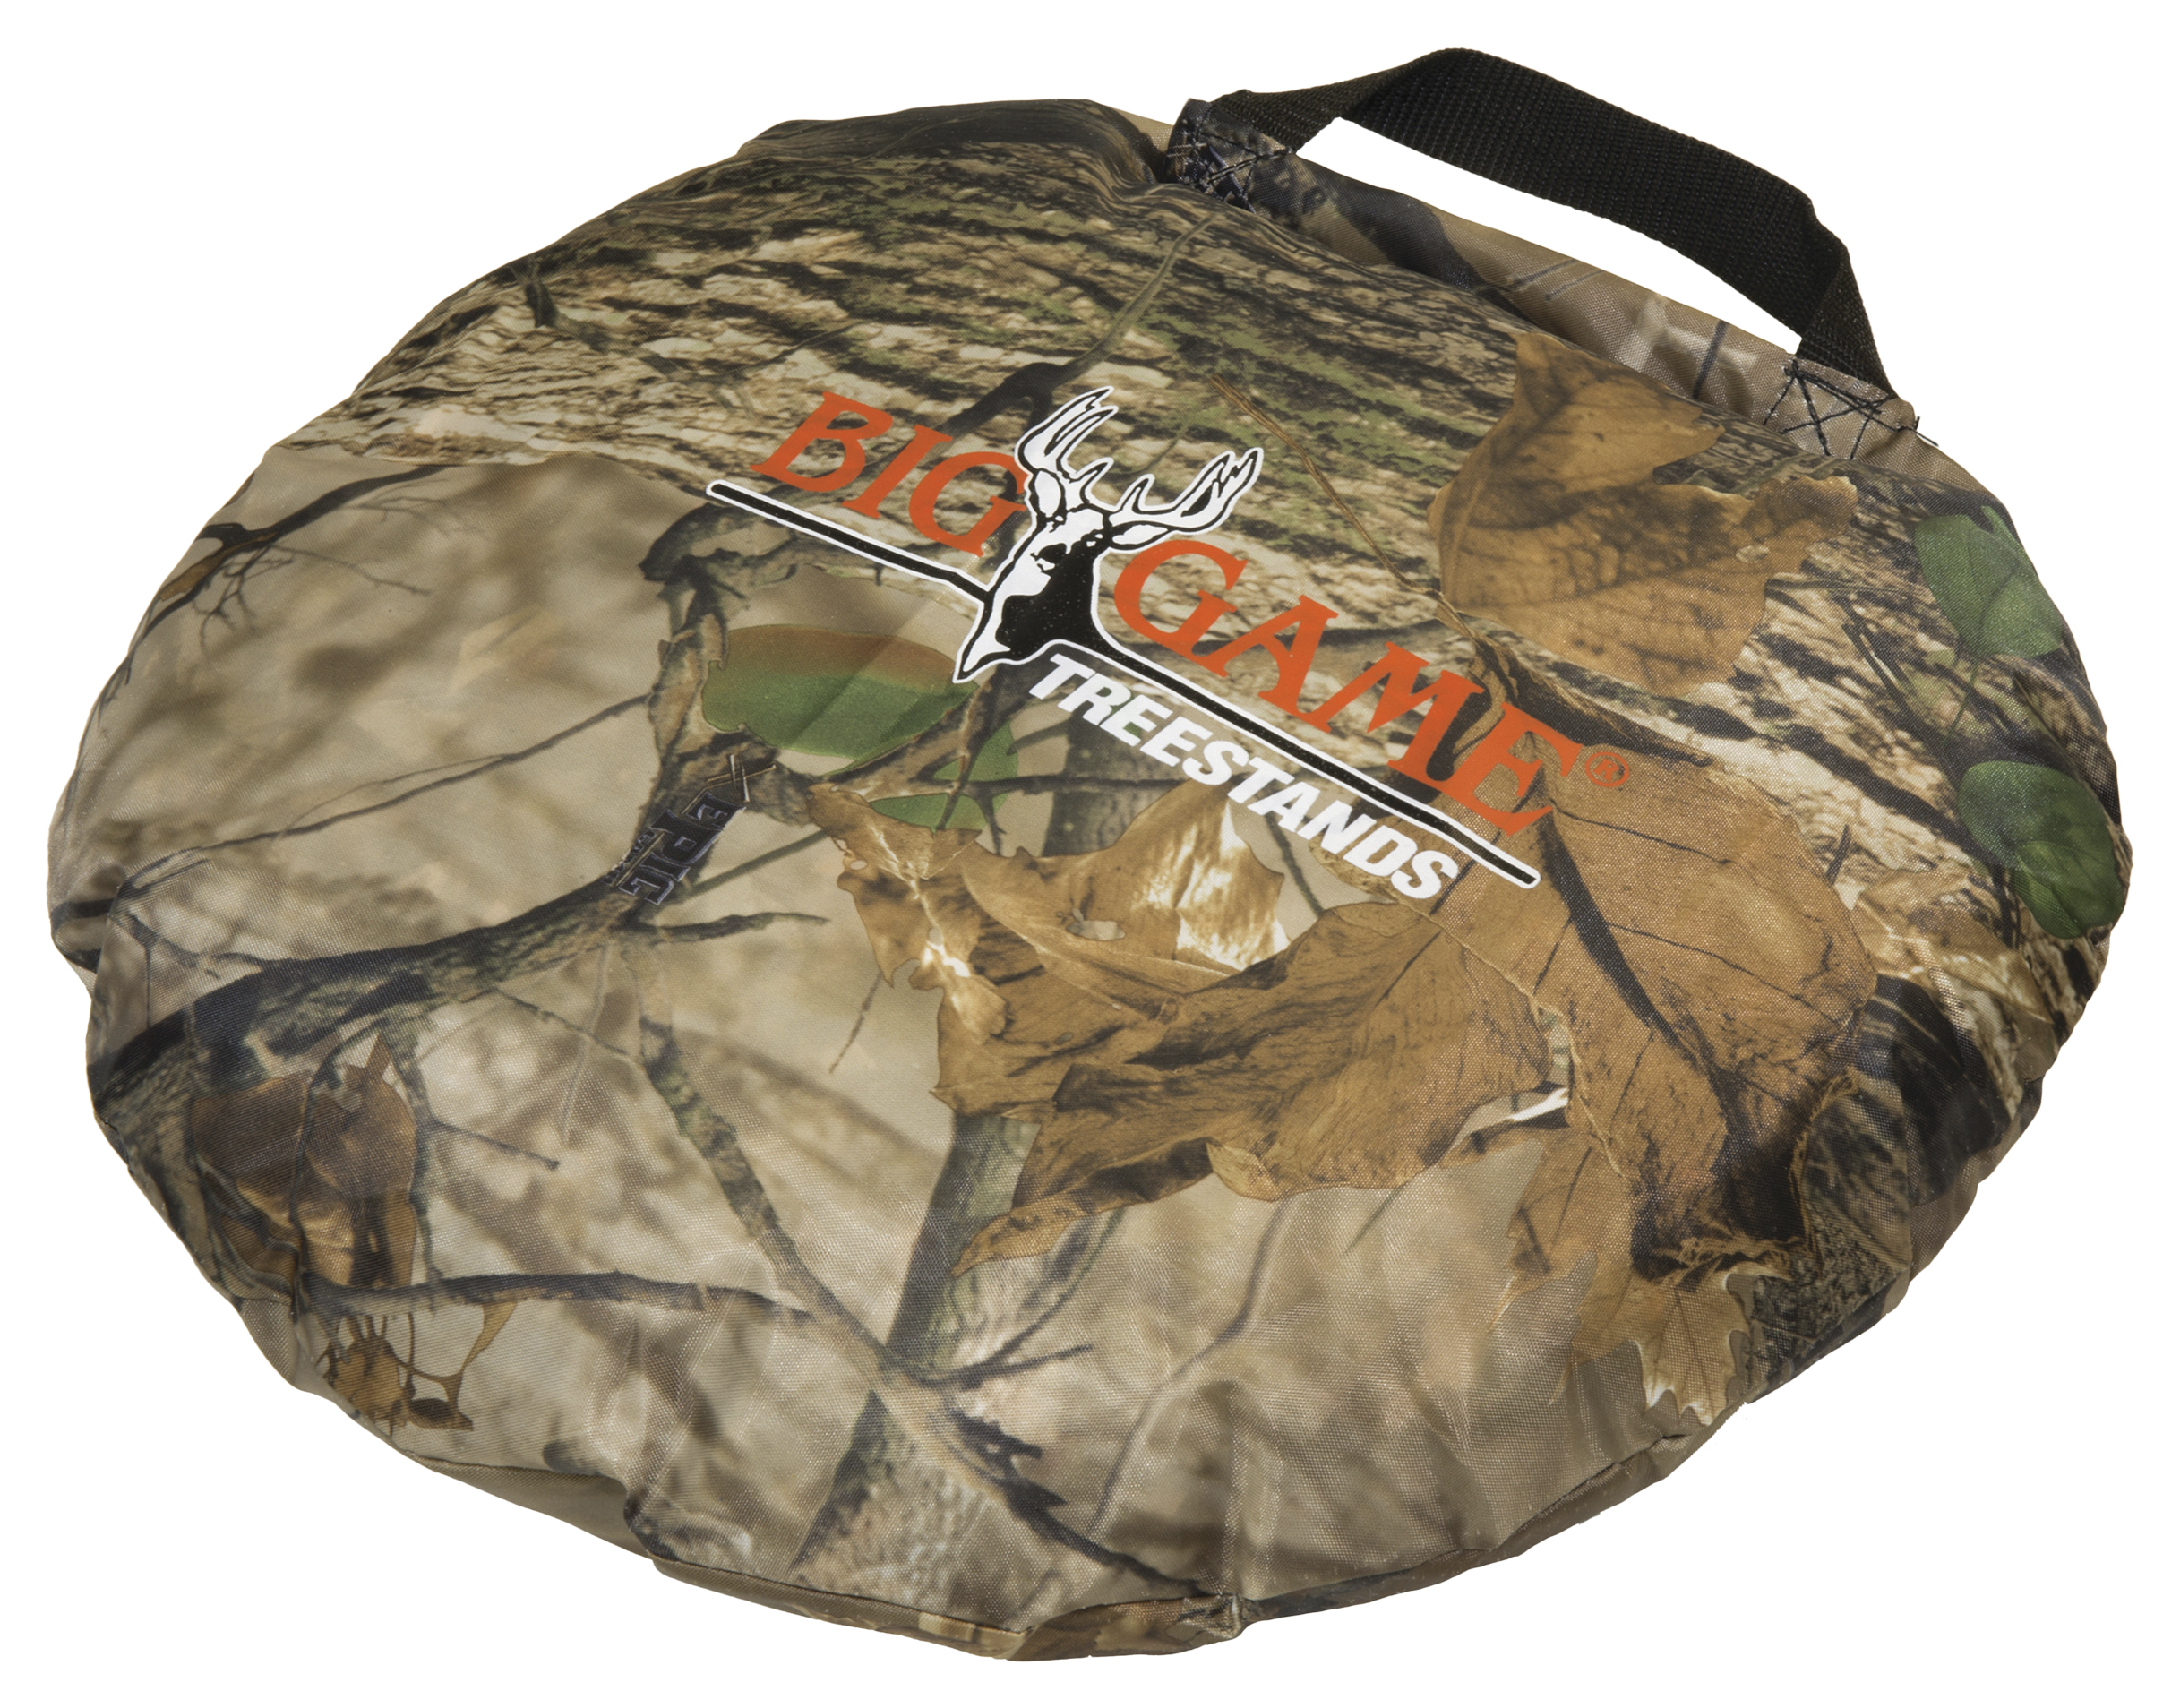 Tail Mate GelCore Seat Cushion (6-Pack) for Hunting, Fishing, or Outdoors